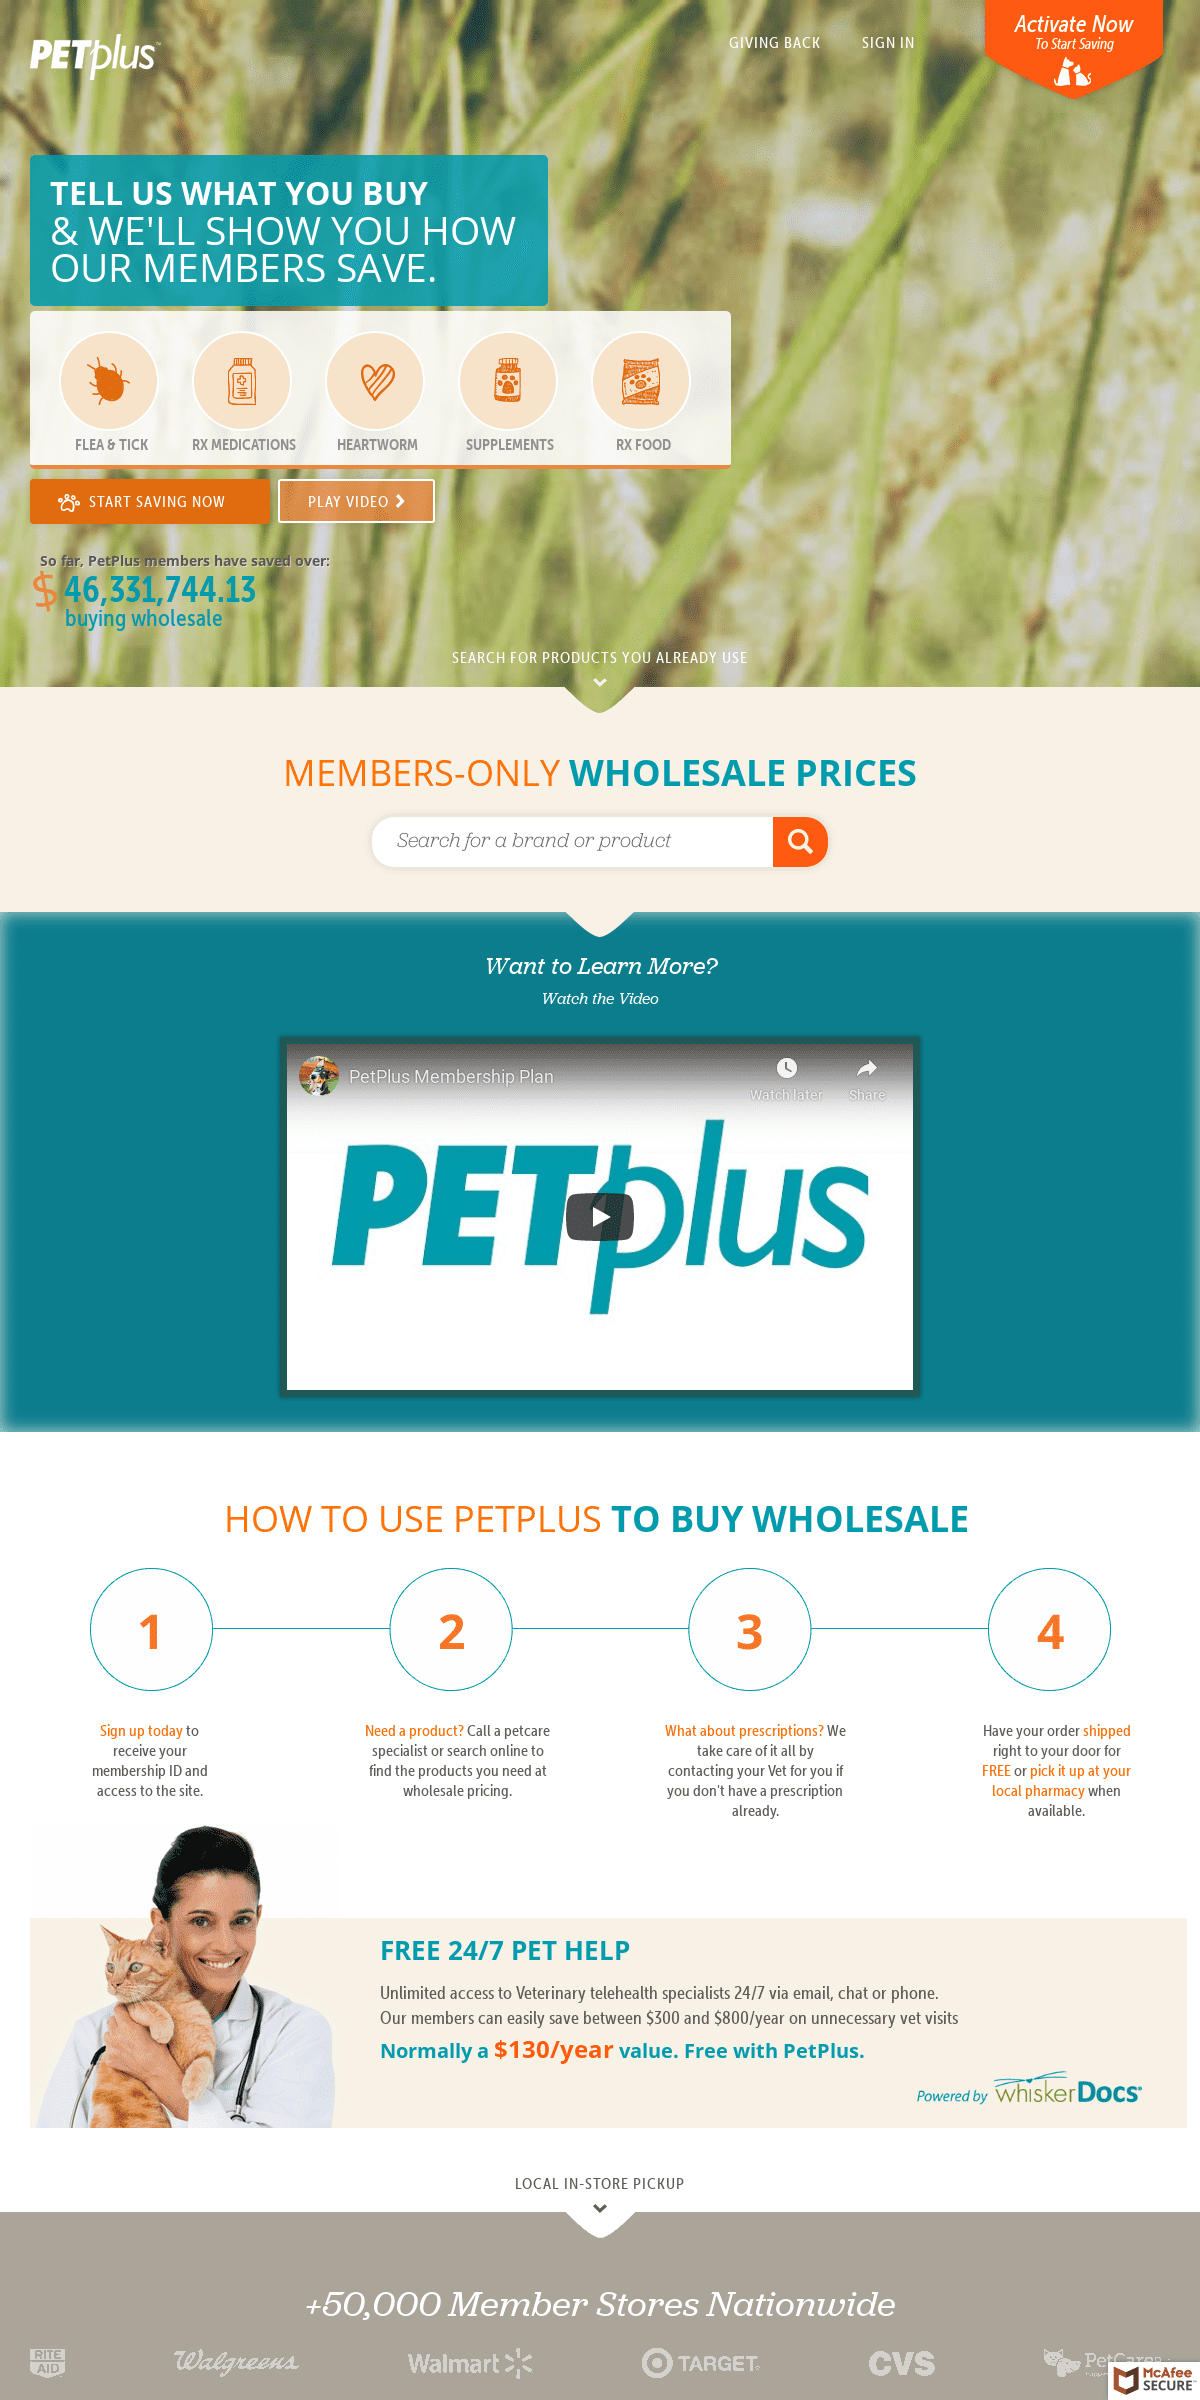 A complete backup of petplus.com